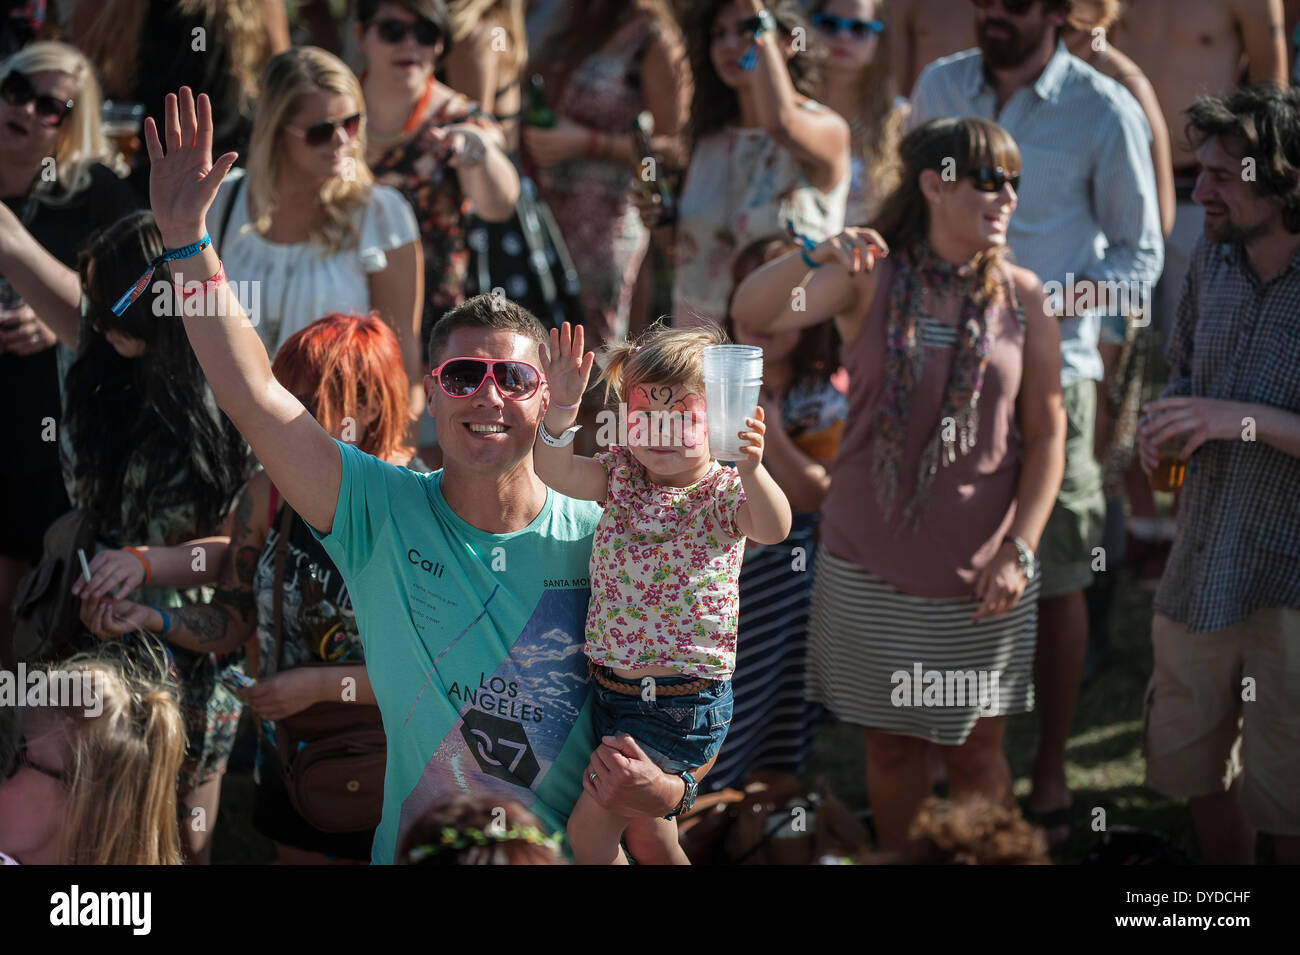 A father and daughter at the Brownstock Festival in Essex. Stock Photo